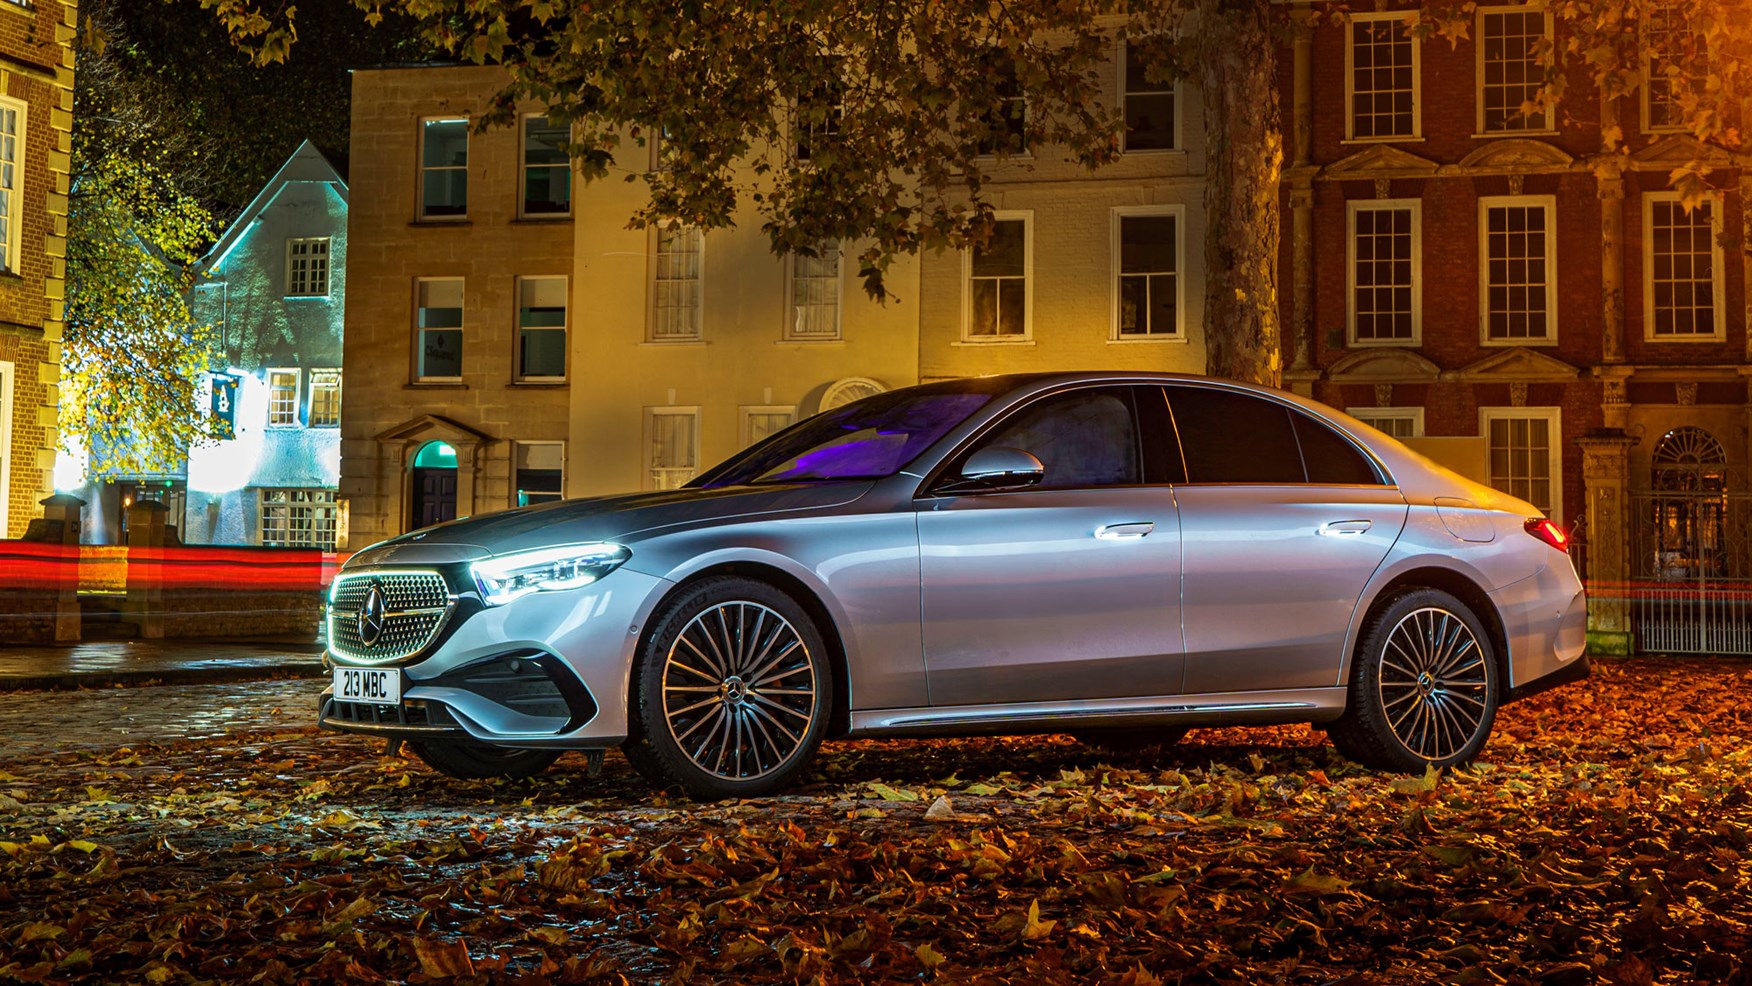 W213 Mercedes-Benz E300e and E300de debut - new plug-in hybrid models with  up to 320 PS, 1.6 l/100 km 